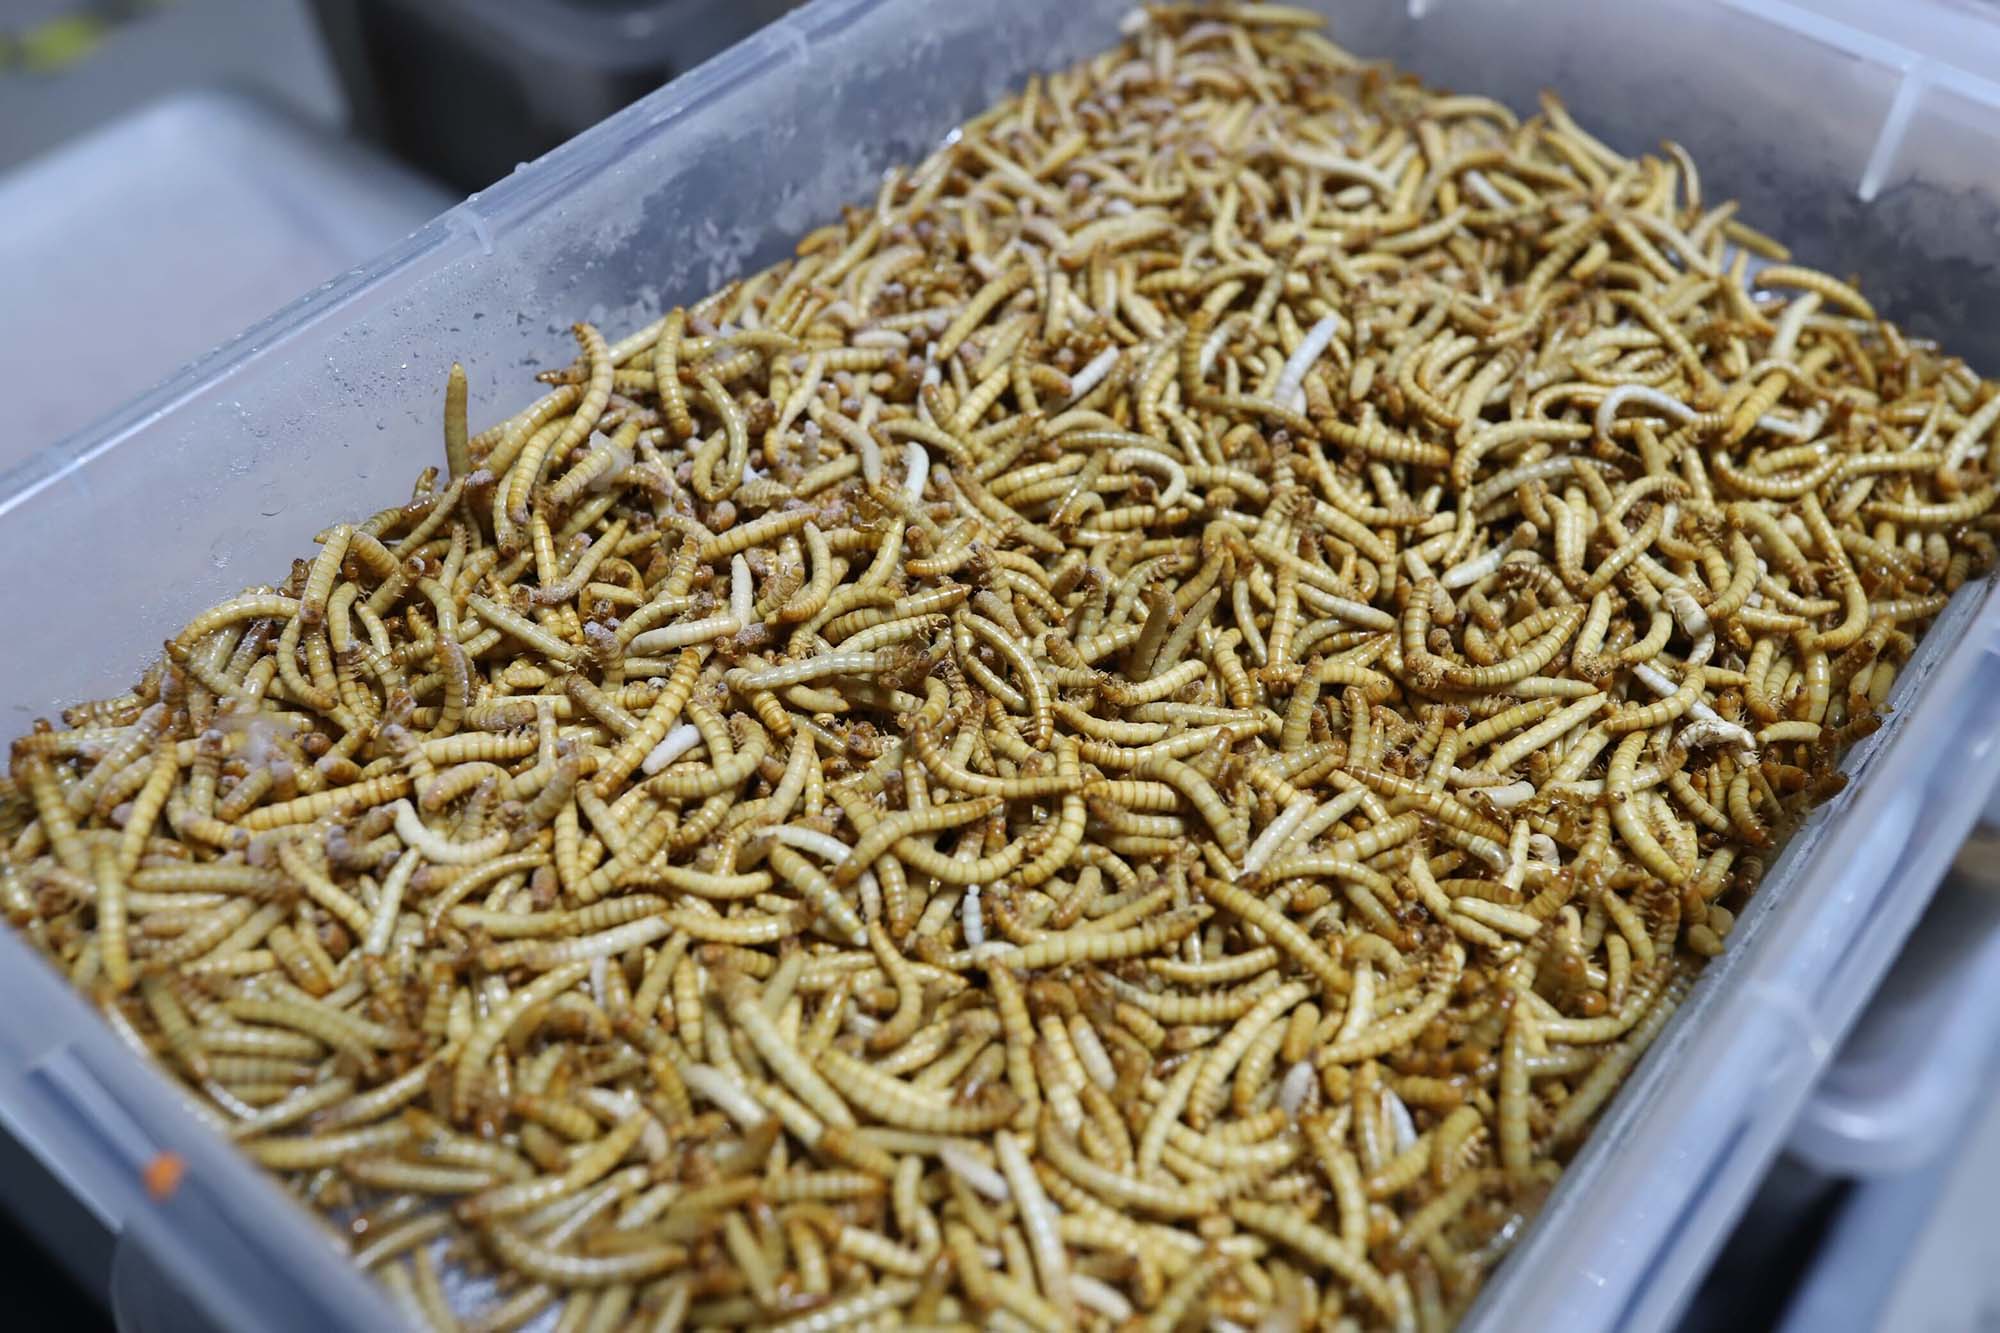 A plastic bin full of thousands of frozen mealworms.